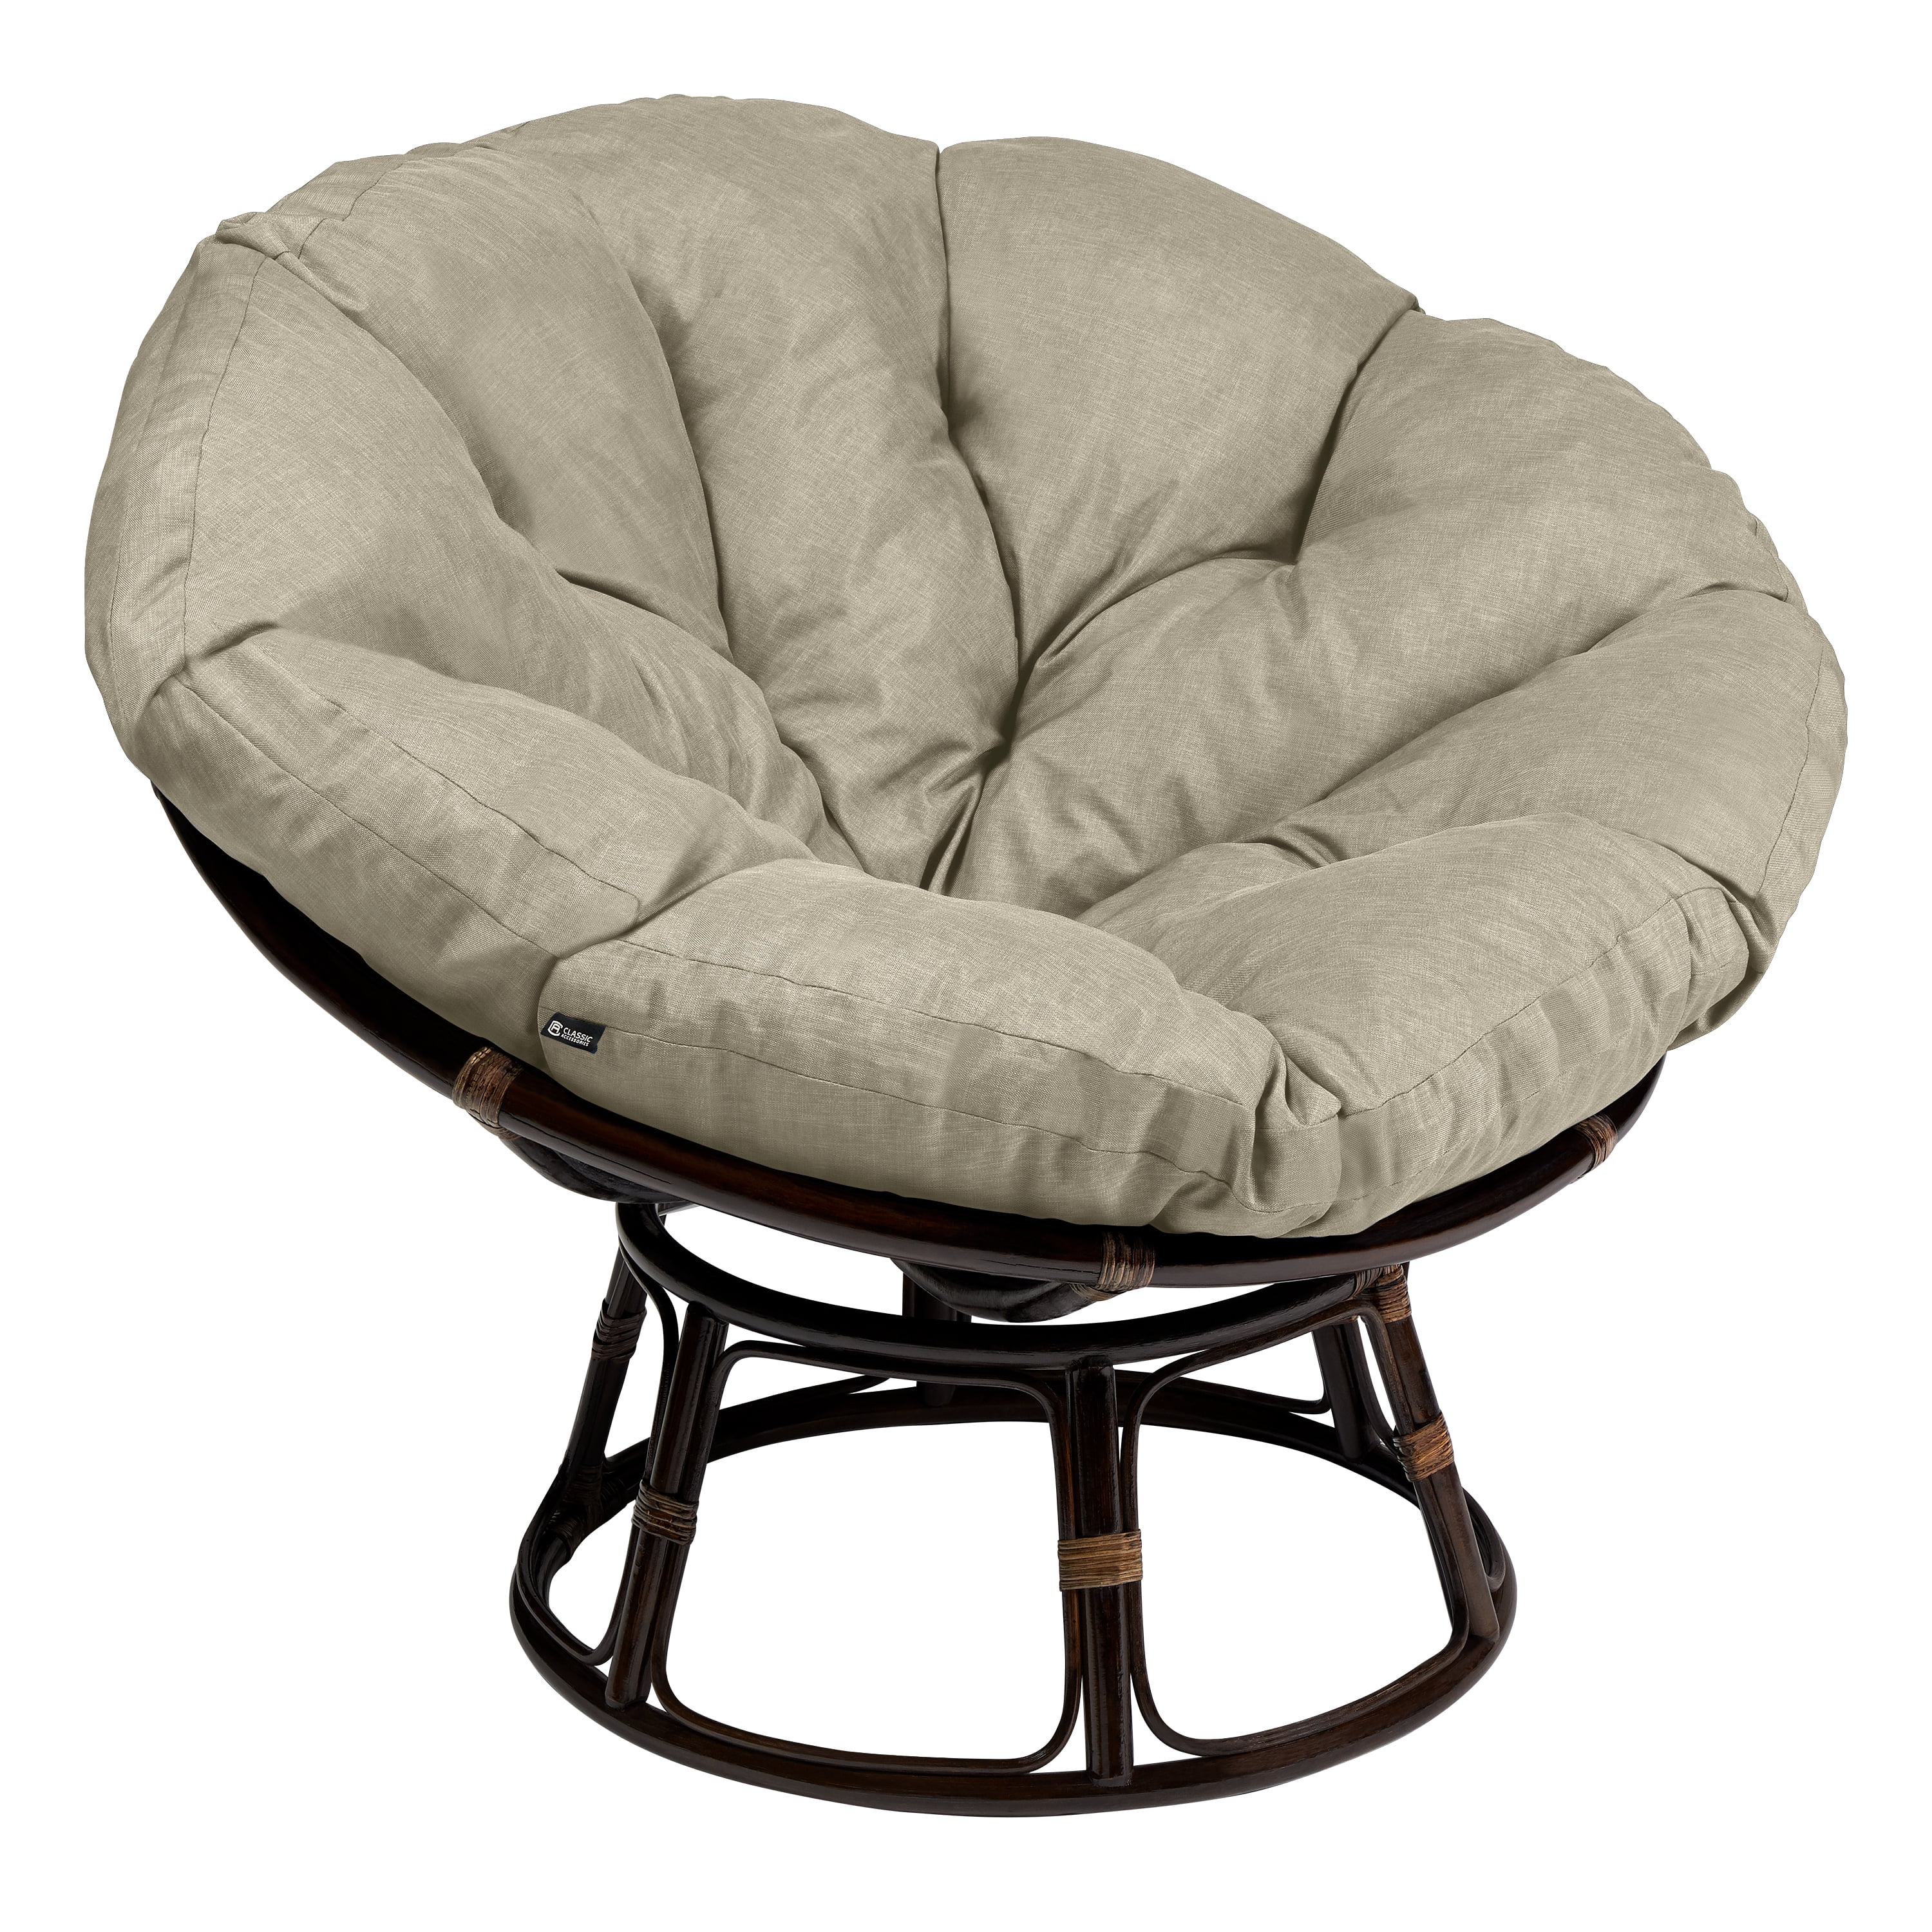 Photo 1 of **cushion only**
Classic Accessories Montlake Water-Resistant 50 Inch Papasan Cushion, Heather Grey